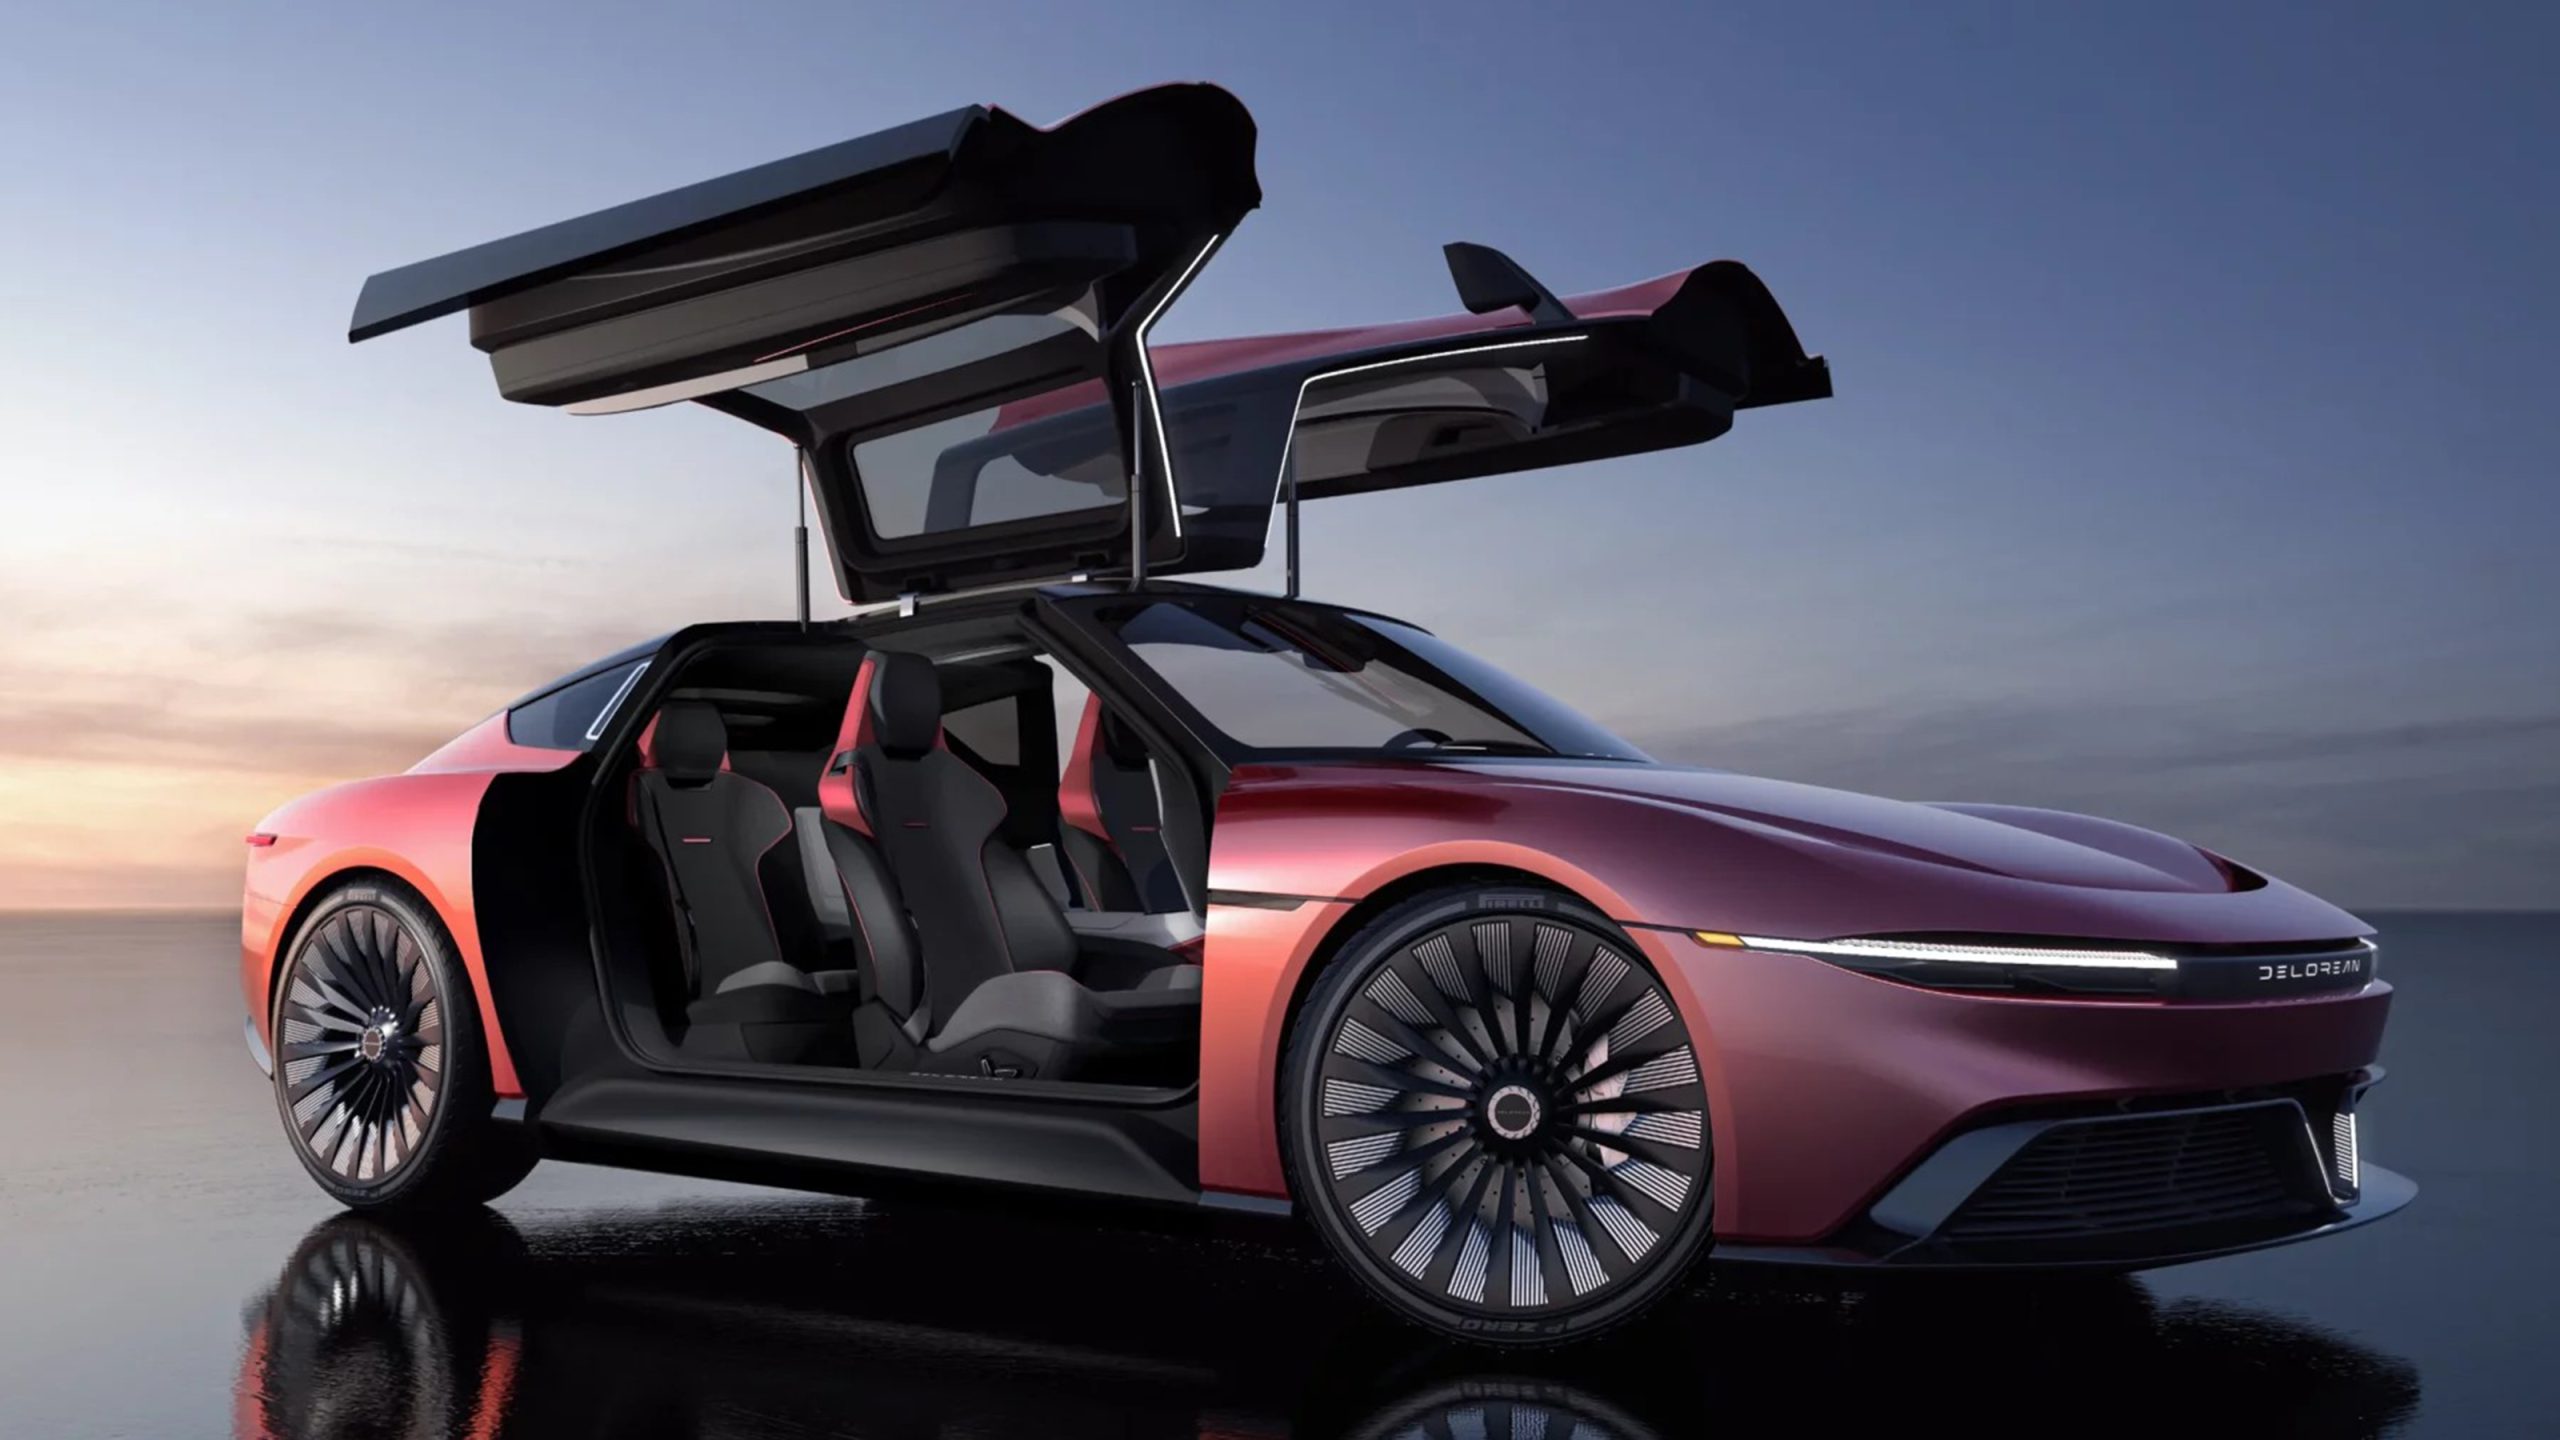 Gull wing doors on a new DeLorean.